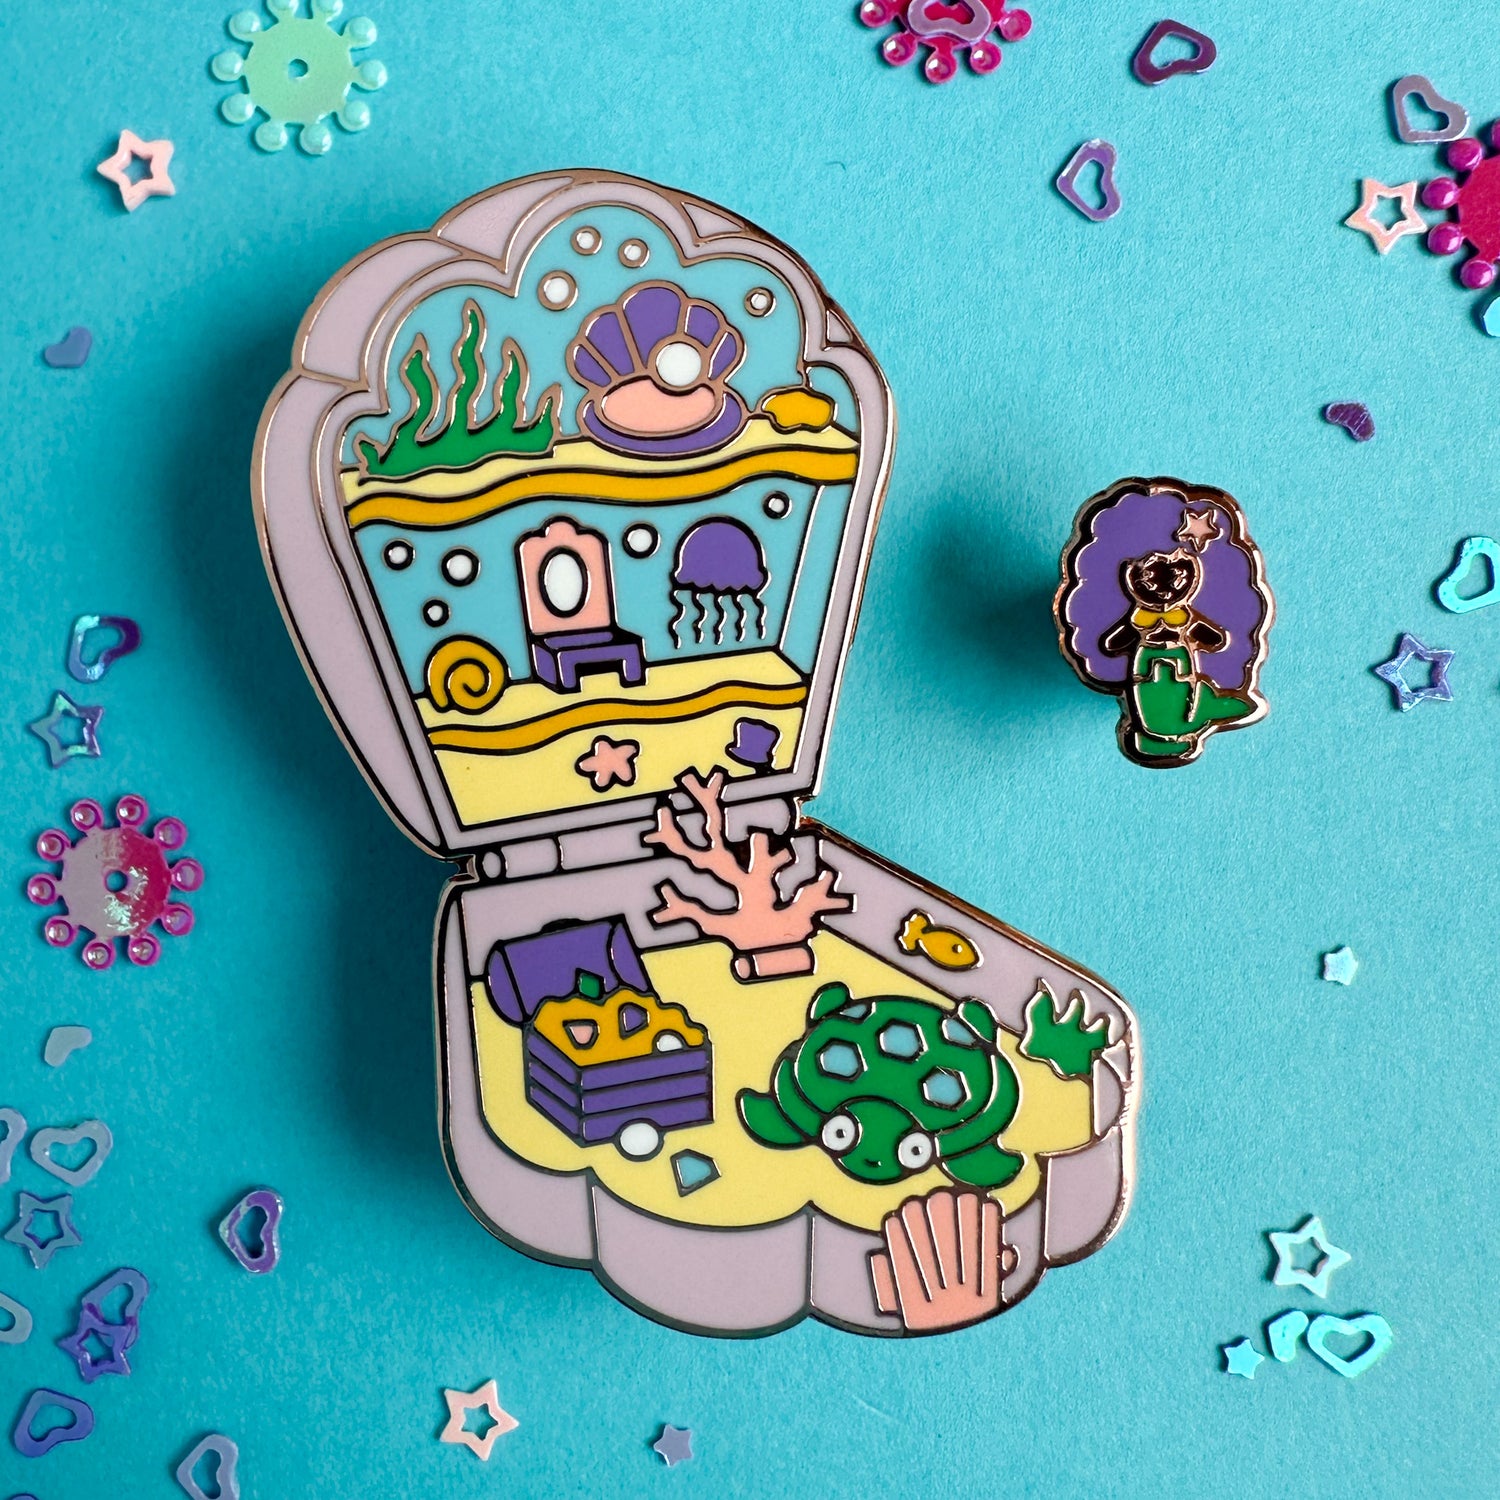 An enamel pin in the shape of a Polly Pocket compact shell with a mermaid mini pin. The shell compact is the mermaid's home with a jellyfish, coral, treasure chest, and a turtle. The pins are on a blue background with confetti